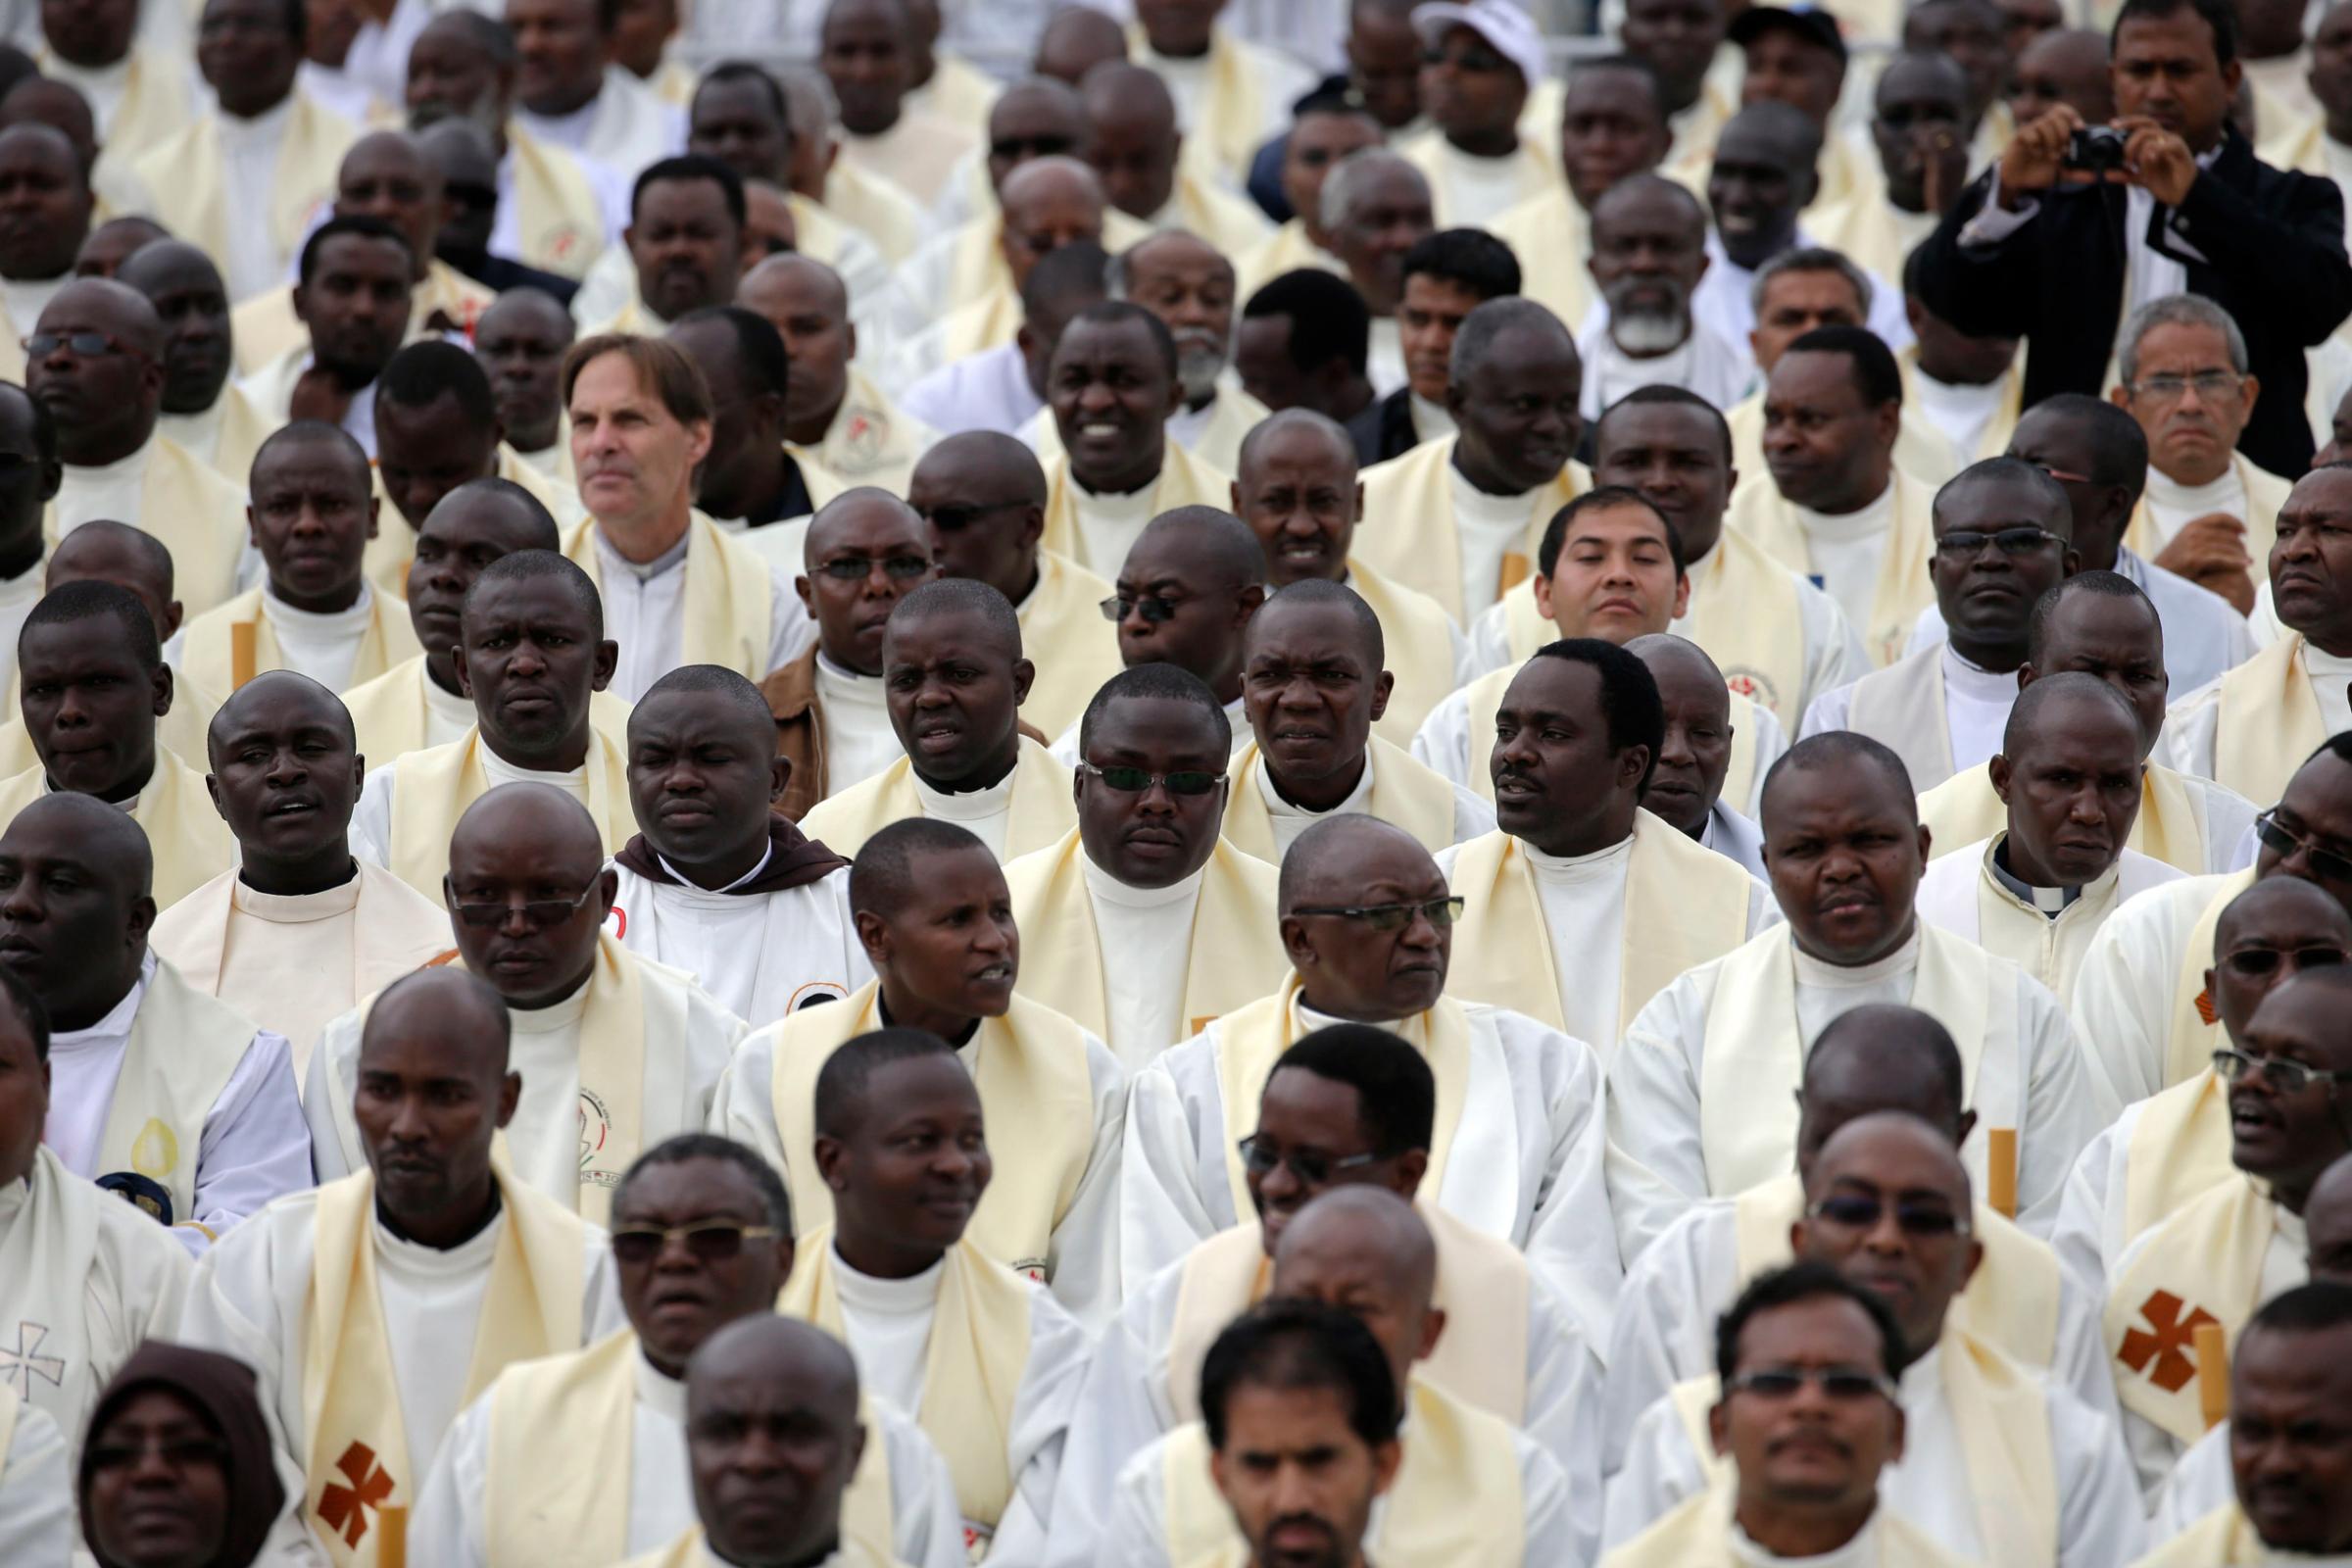 Priests attend a Mass celebrated by Pope Francis on the campus of the University of Nairobi, Kenya, Thursday, Nov. 26, 2015. Francis told Christian and Muslim leaders in Kenya on Thursday that they have little choice but to engage in dialogue to guard against the "barbarous" Islamic extremist attacks that have struck Kenya as he kicked off his first full day in Africa with a message of tolerance and peace. (AP Photo/Andrew Medichini)